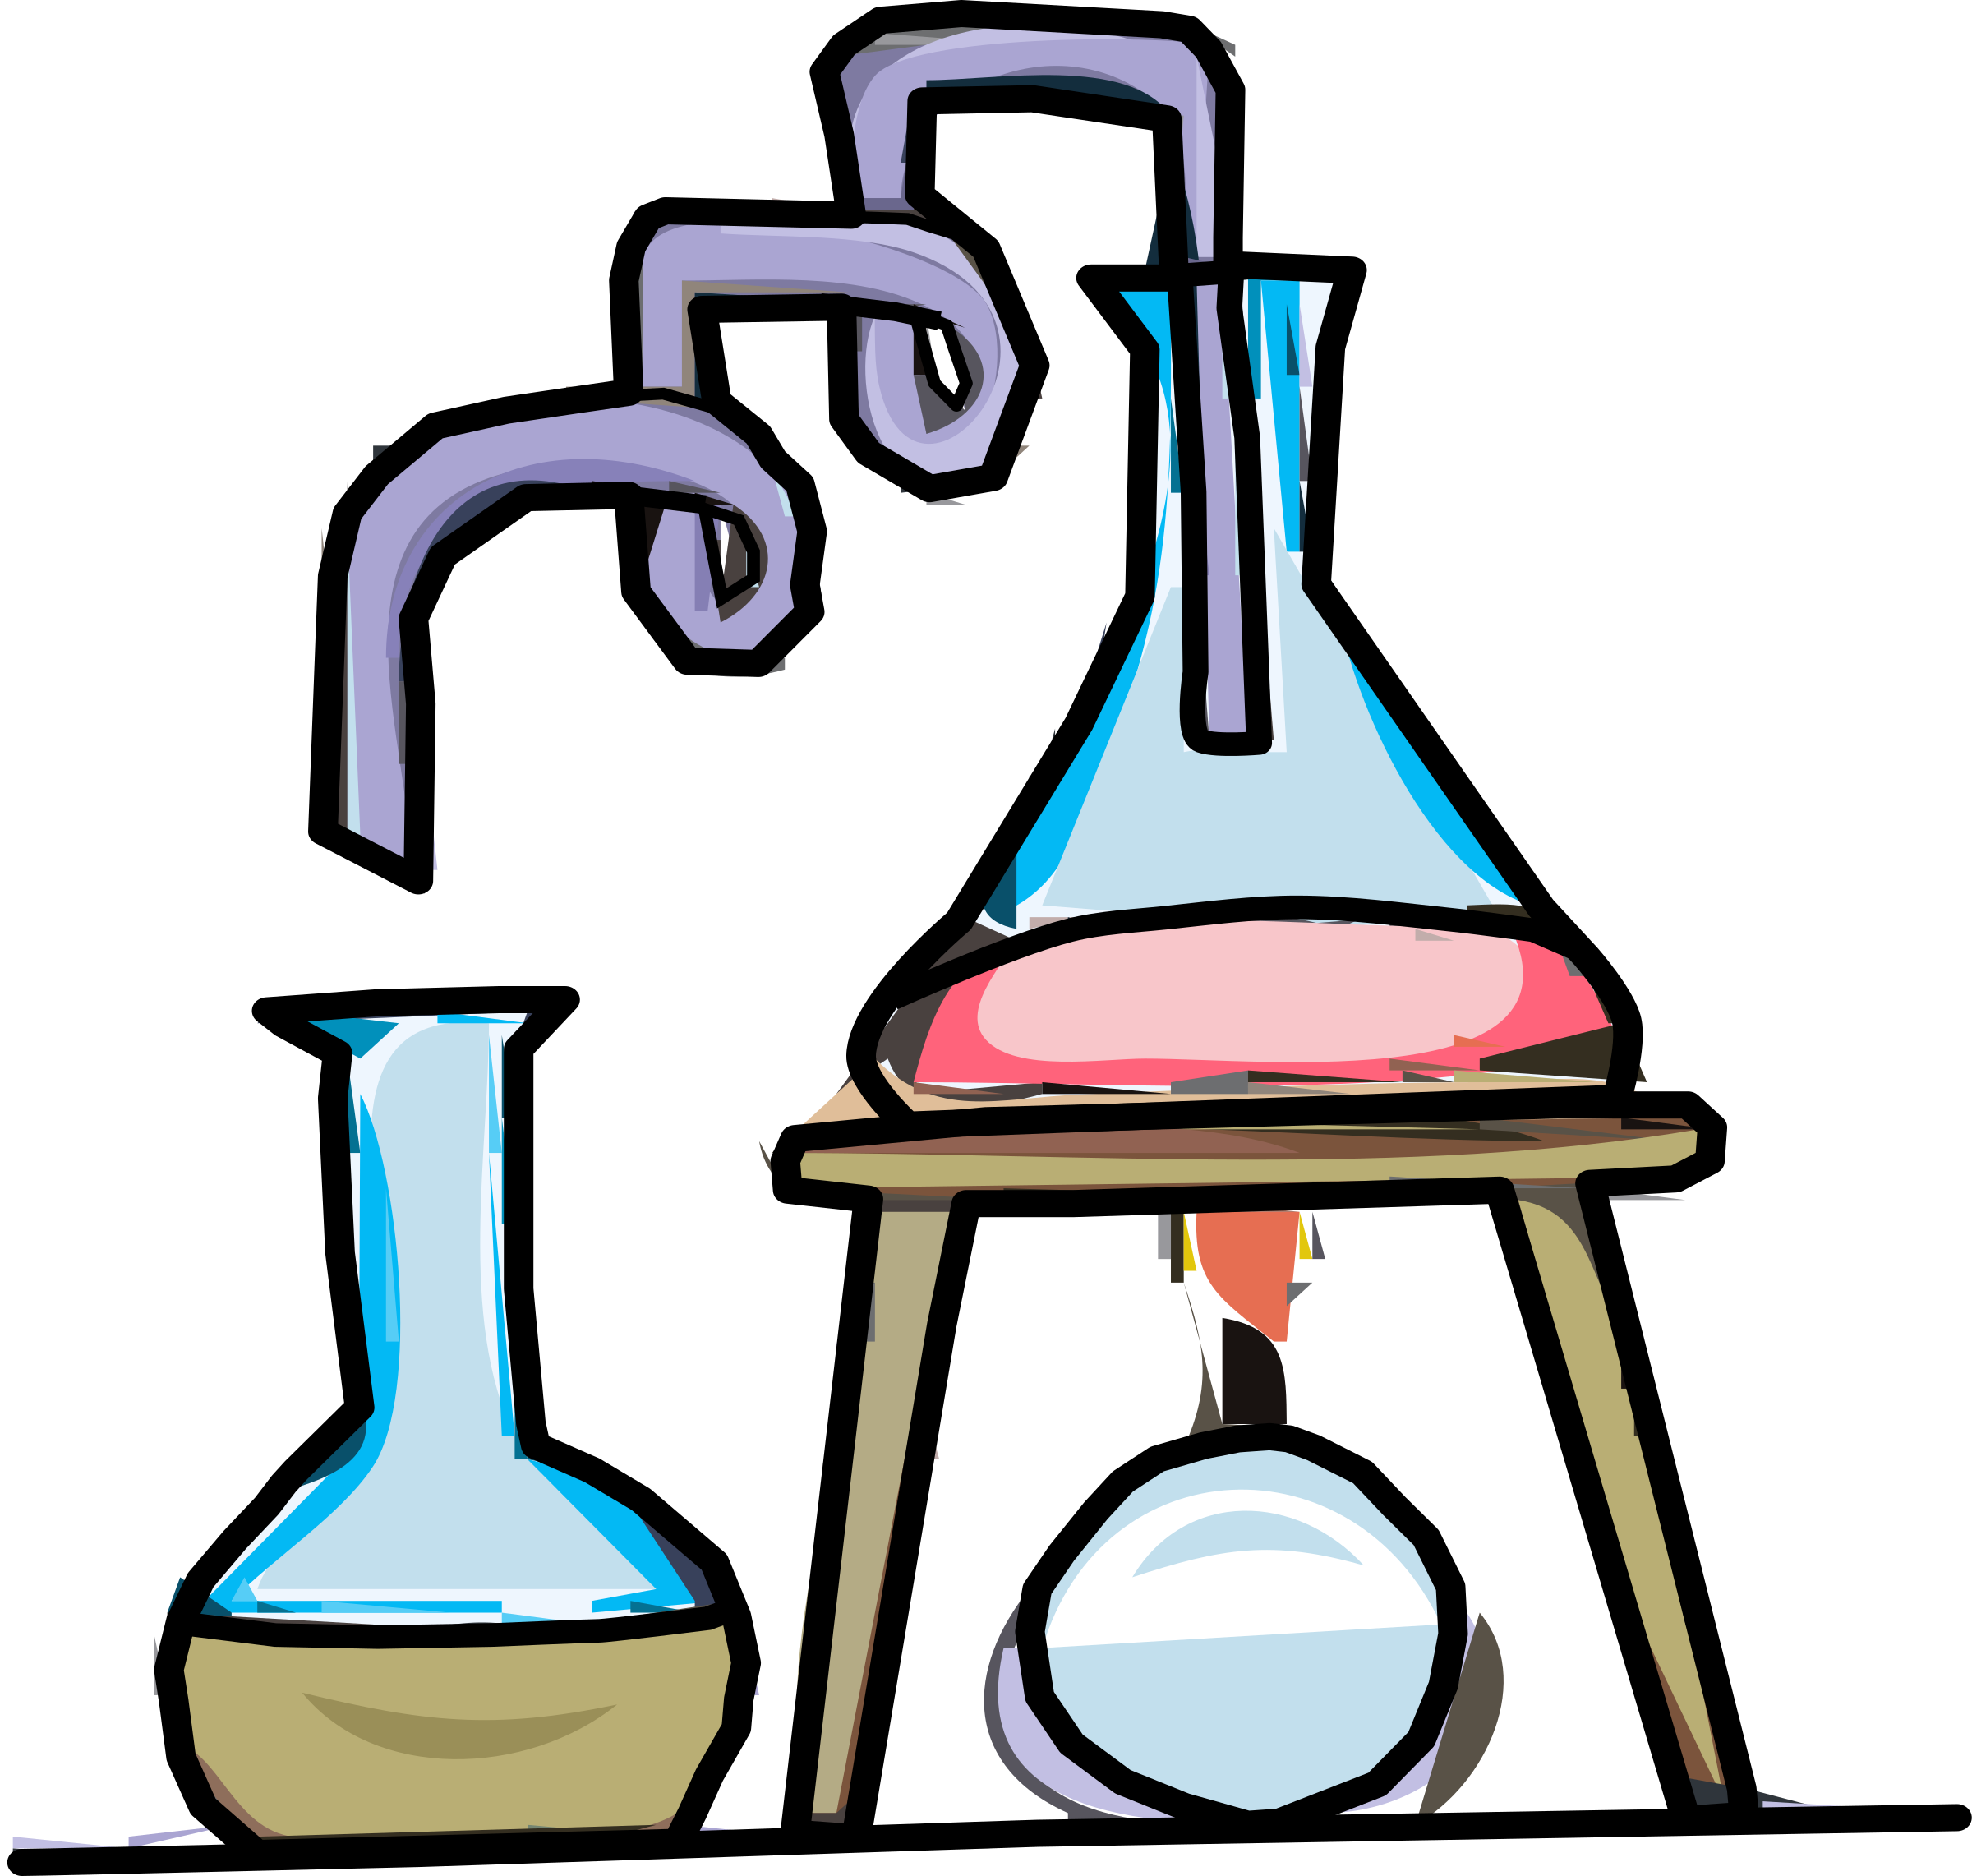 Science Test Tubes Laboratory Clip art - science png download - 2400* ...